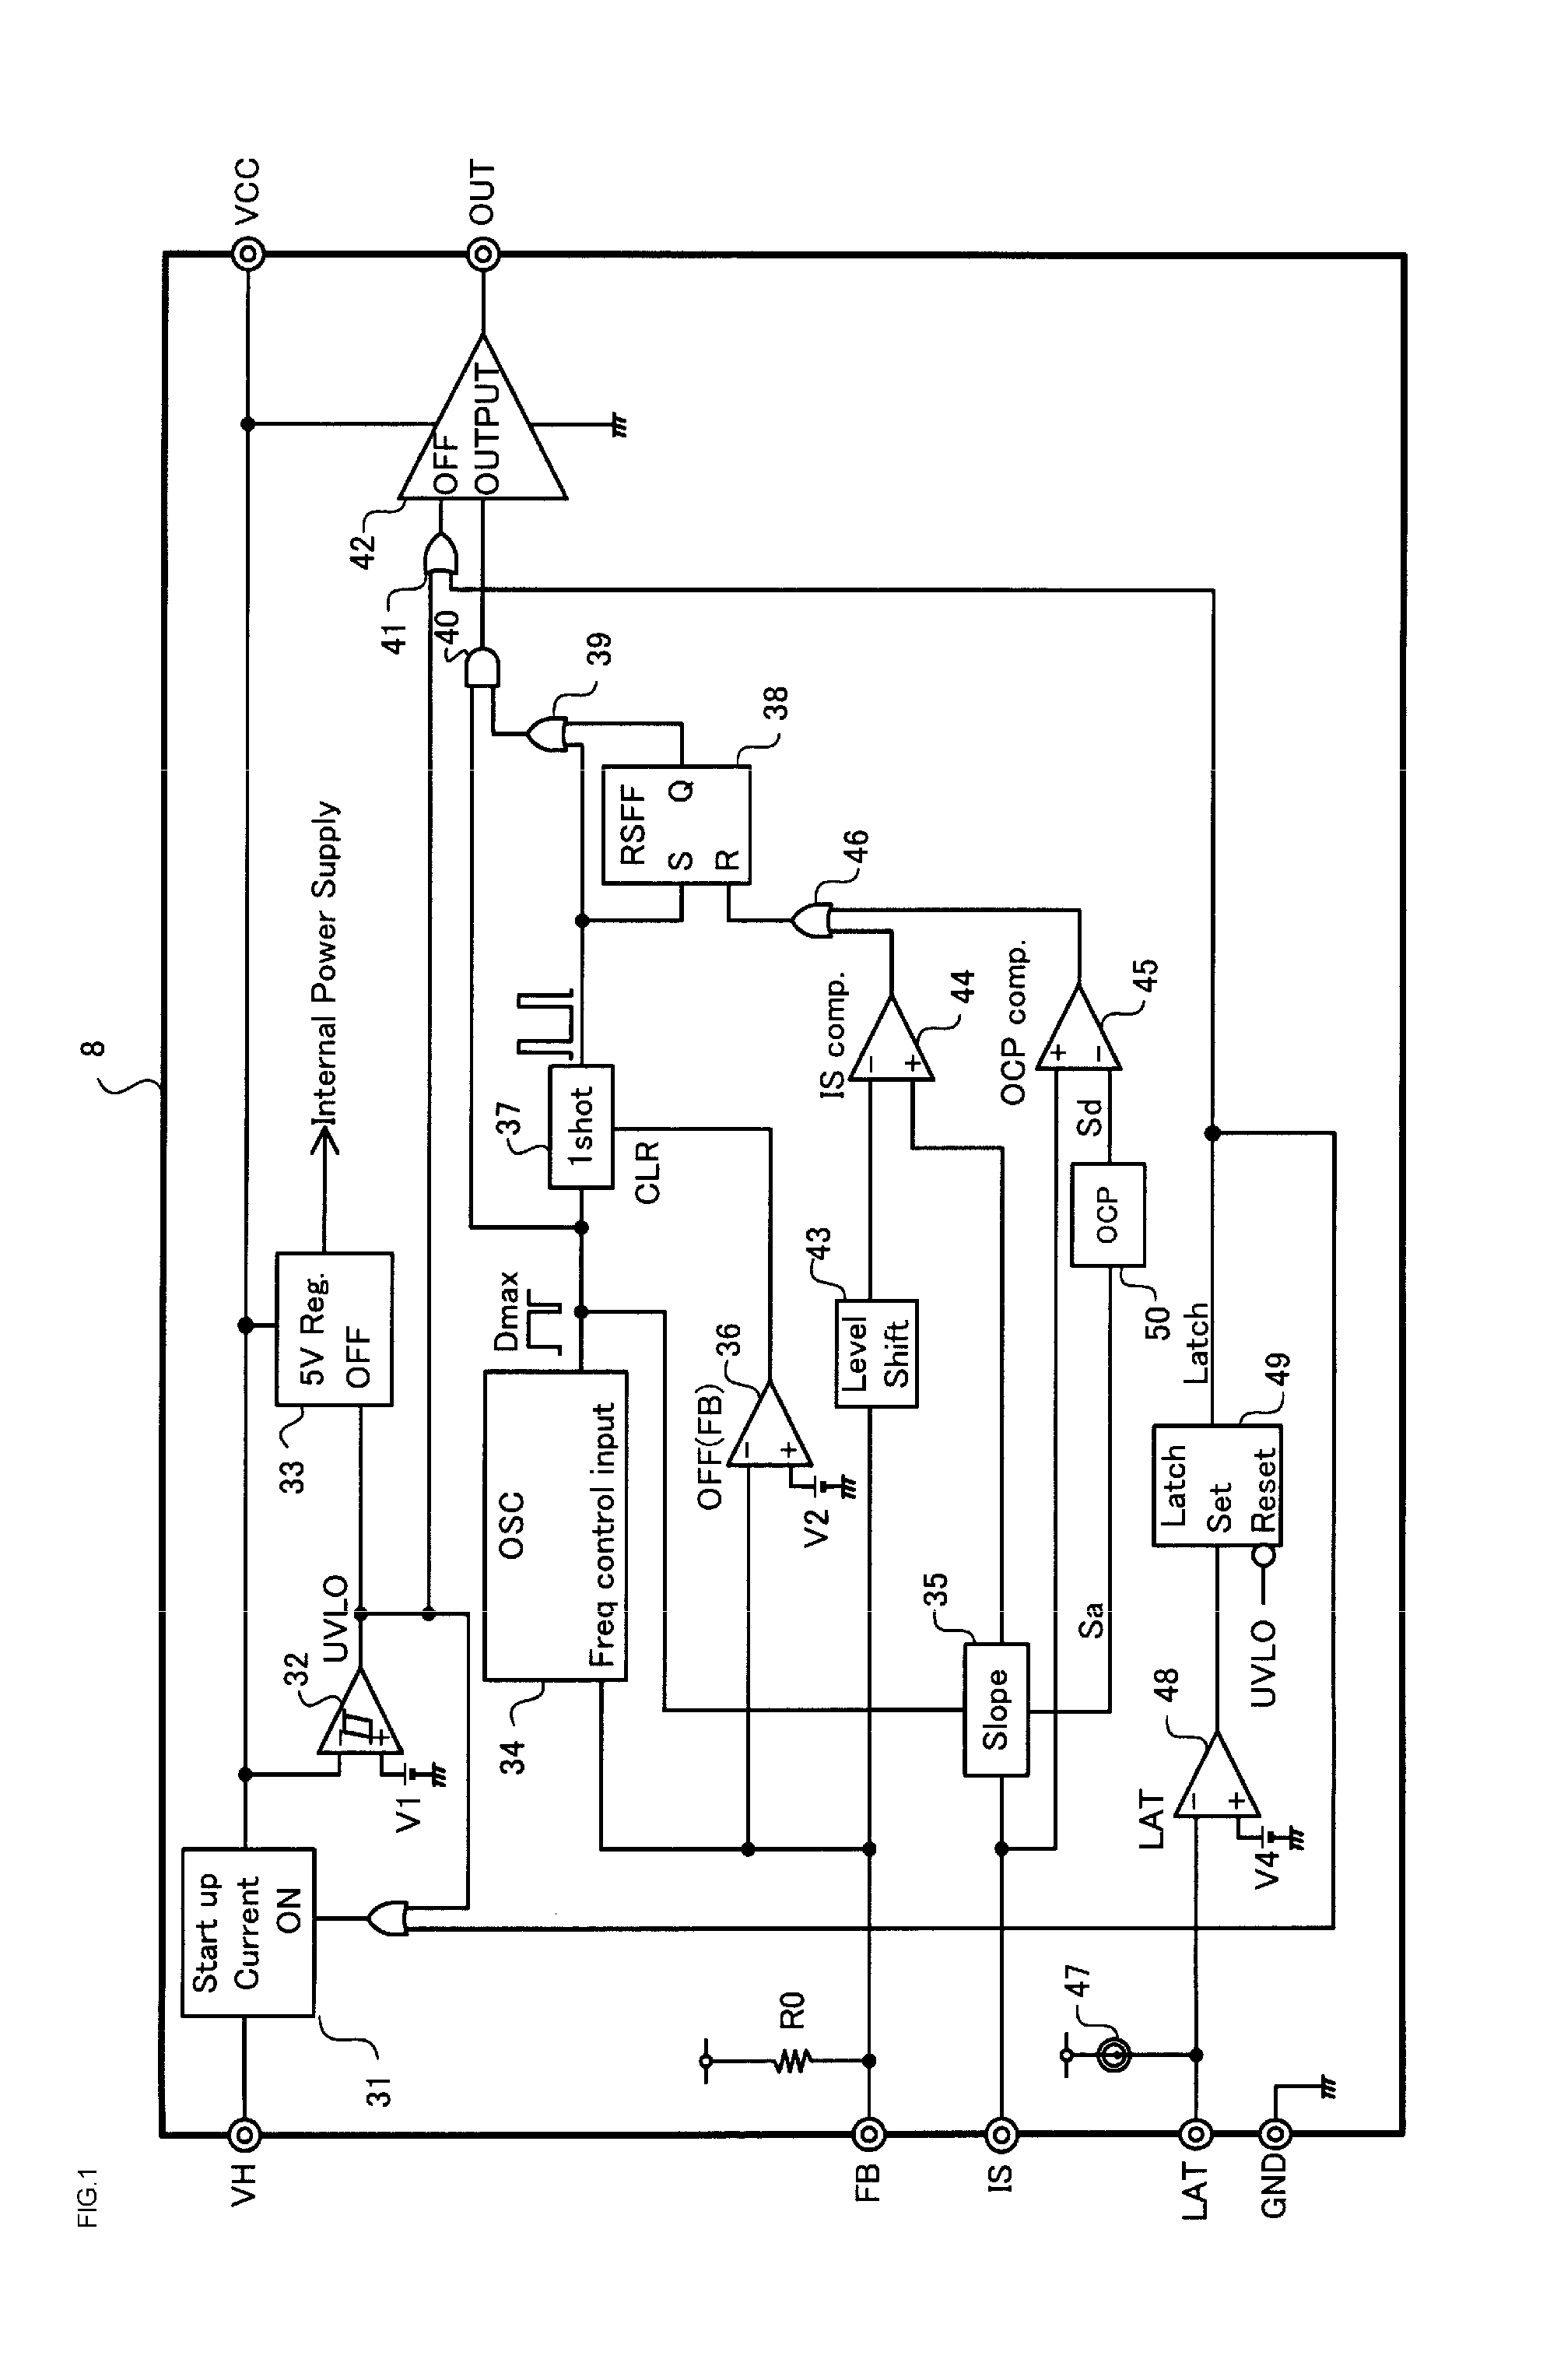 Switching power supply device control circuit having an overcurrent protection control circuit